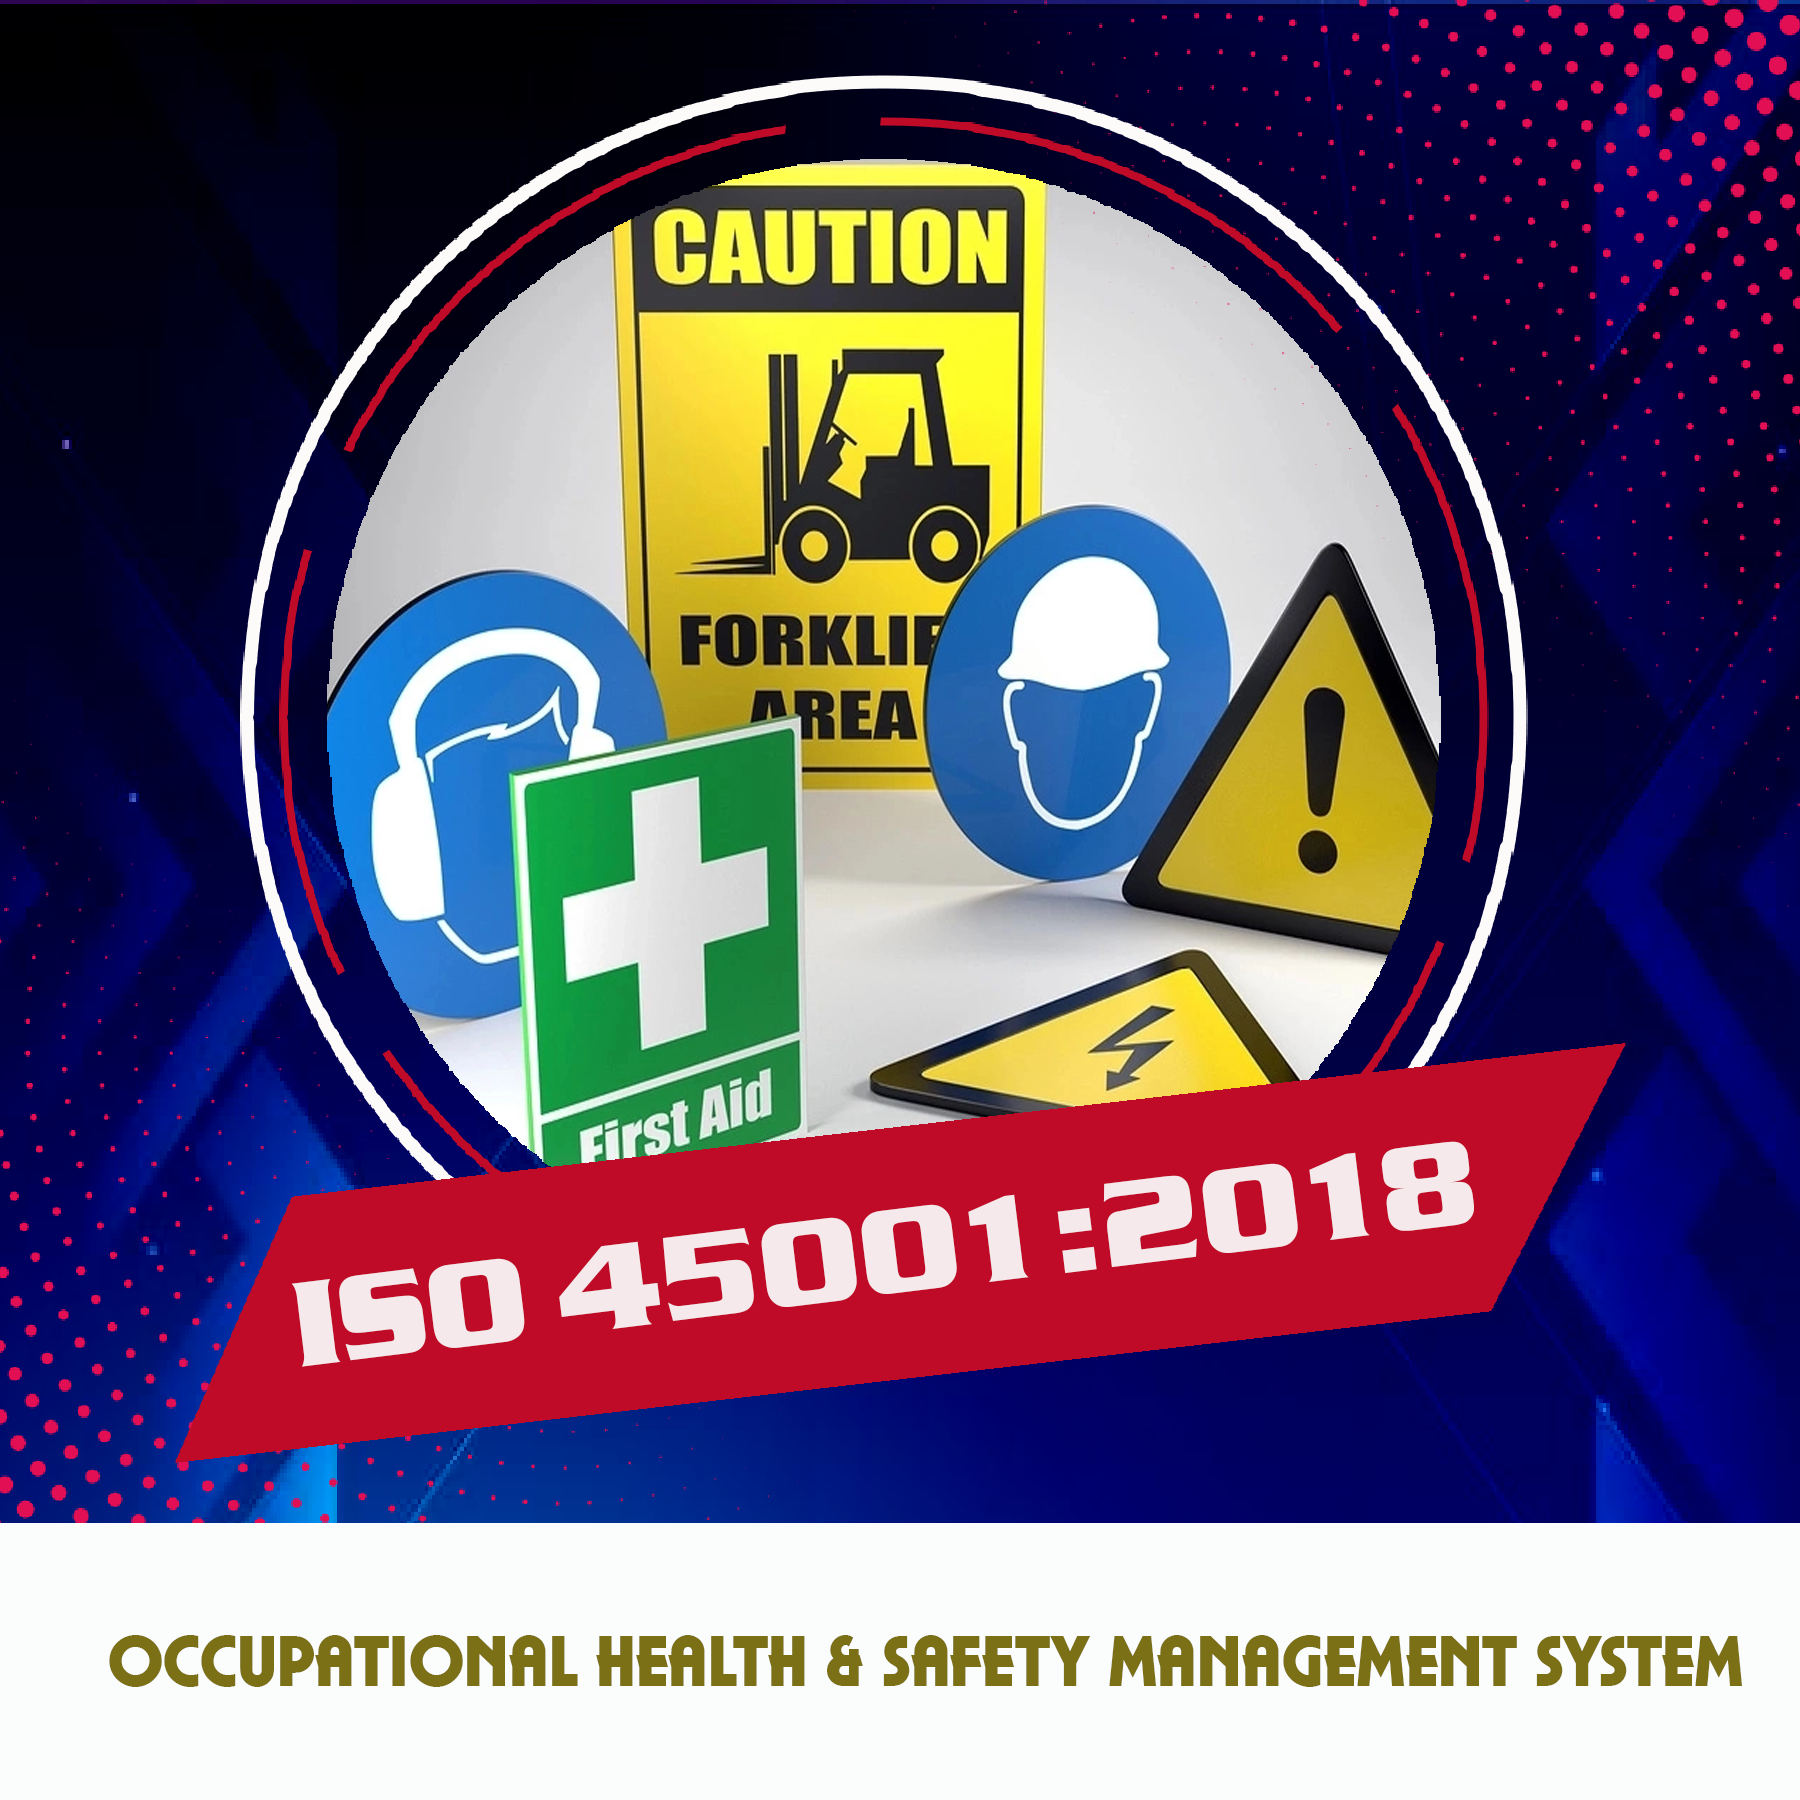  Occupational Health & Safety Management System ISO 45001:2018 & its benefits